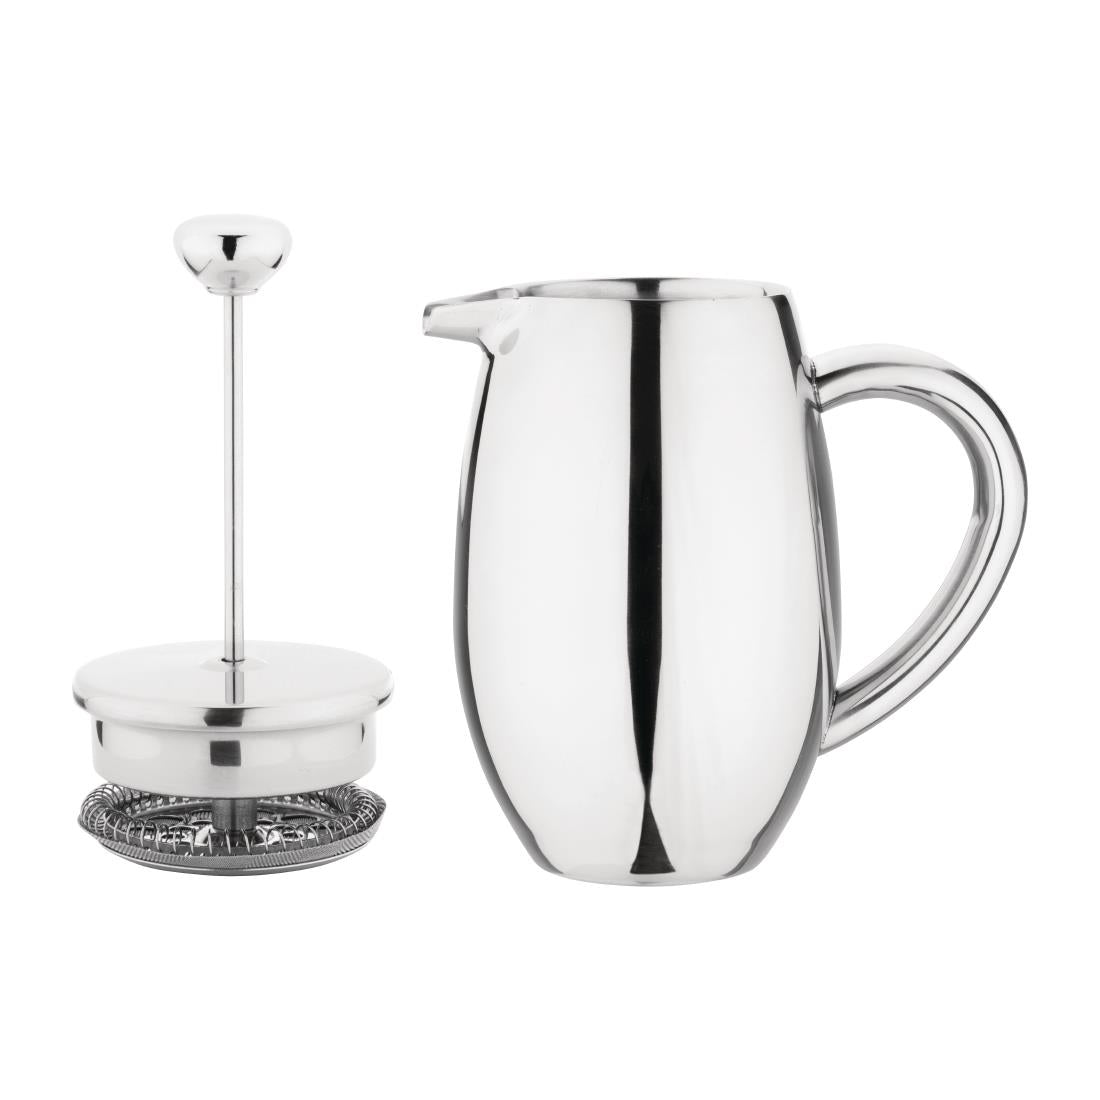 W836 Olympia Insulated Stainless Steel Cafetiere 3 Cup